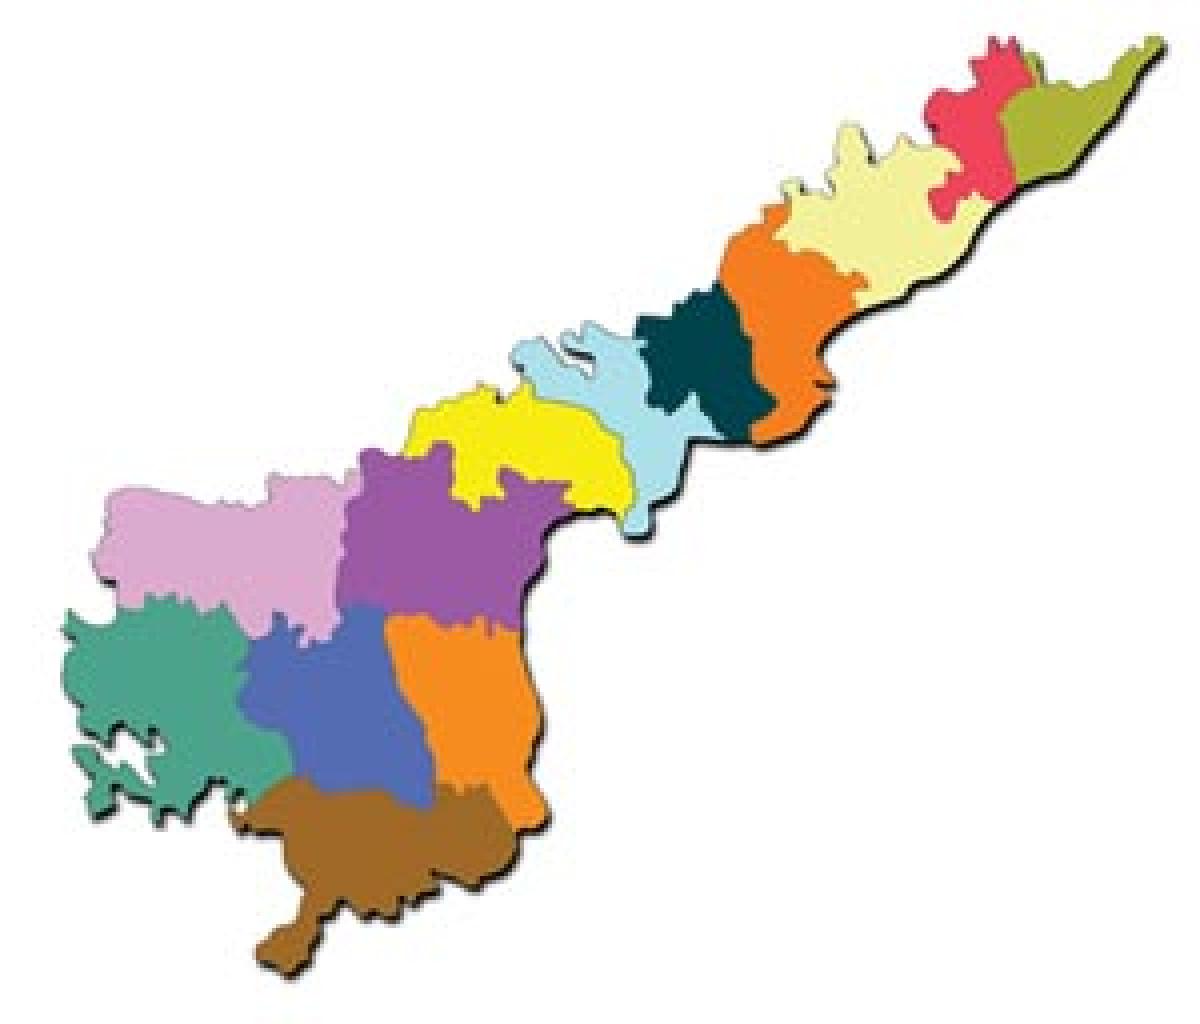 Special Category Status panacea for fiscal woes of Andhra Pradesh